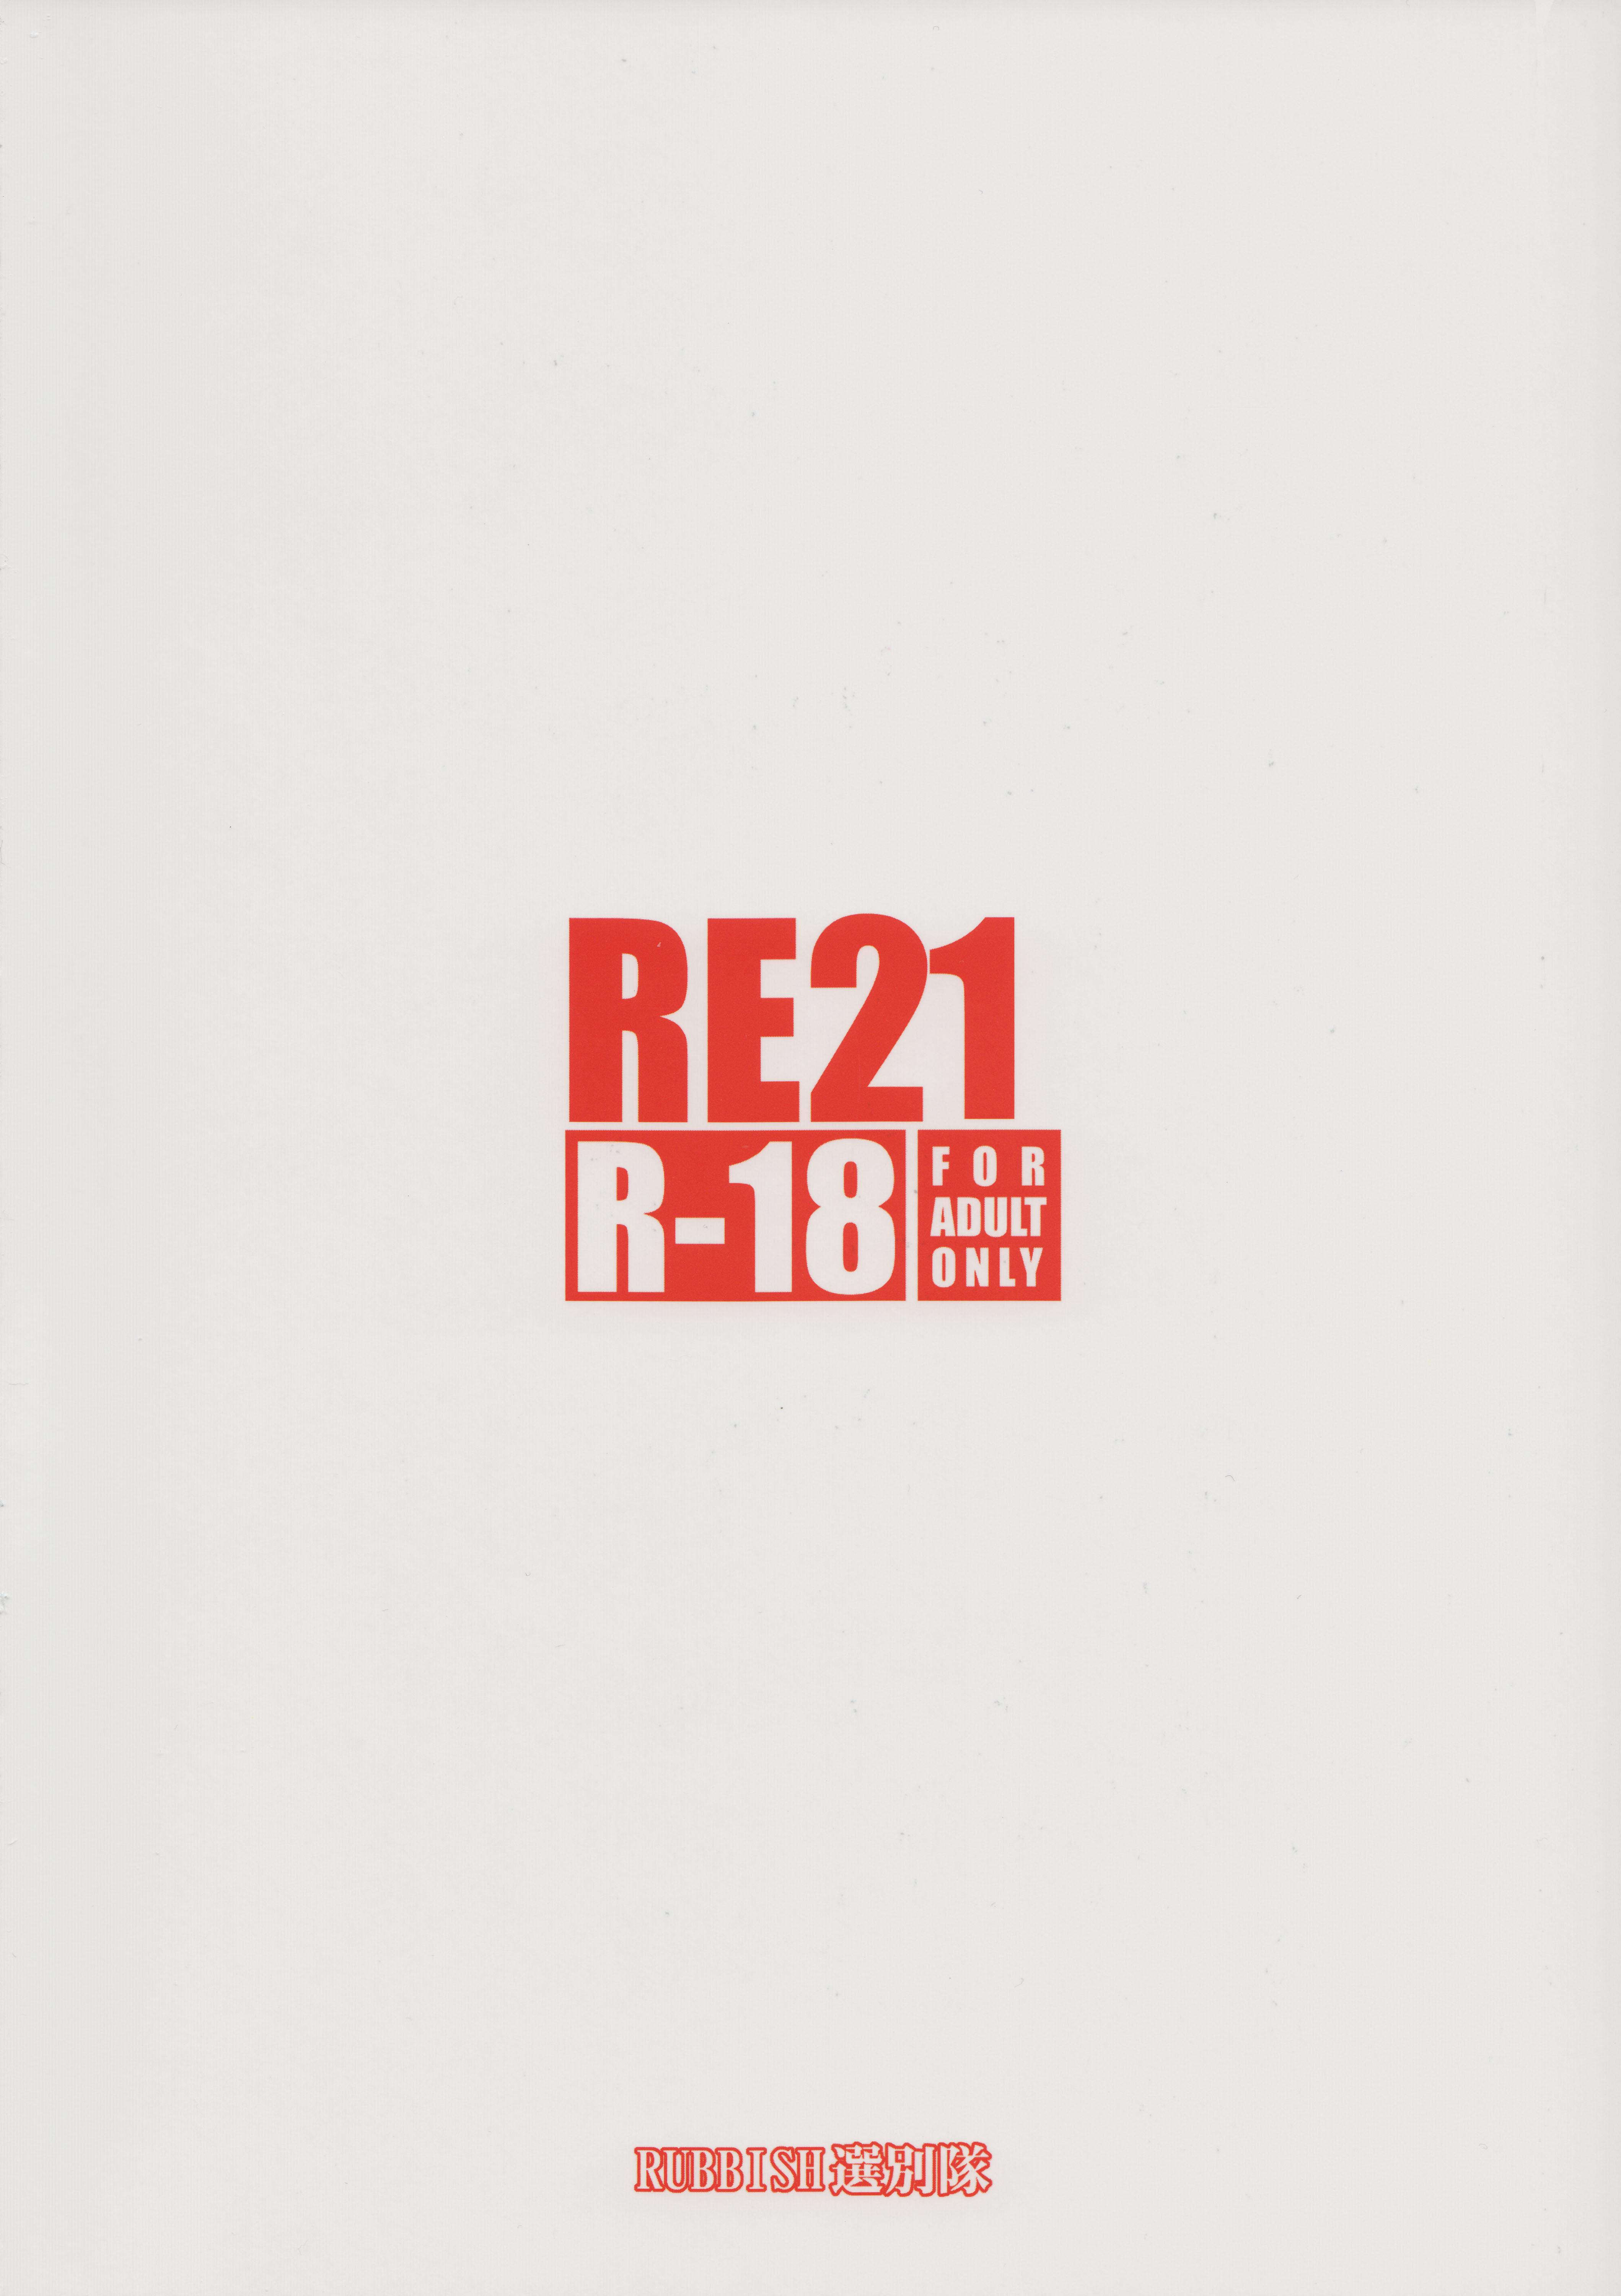 RE 21 33